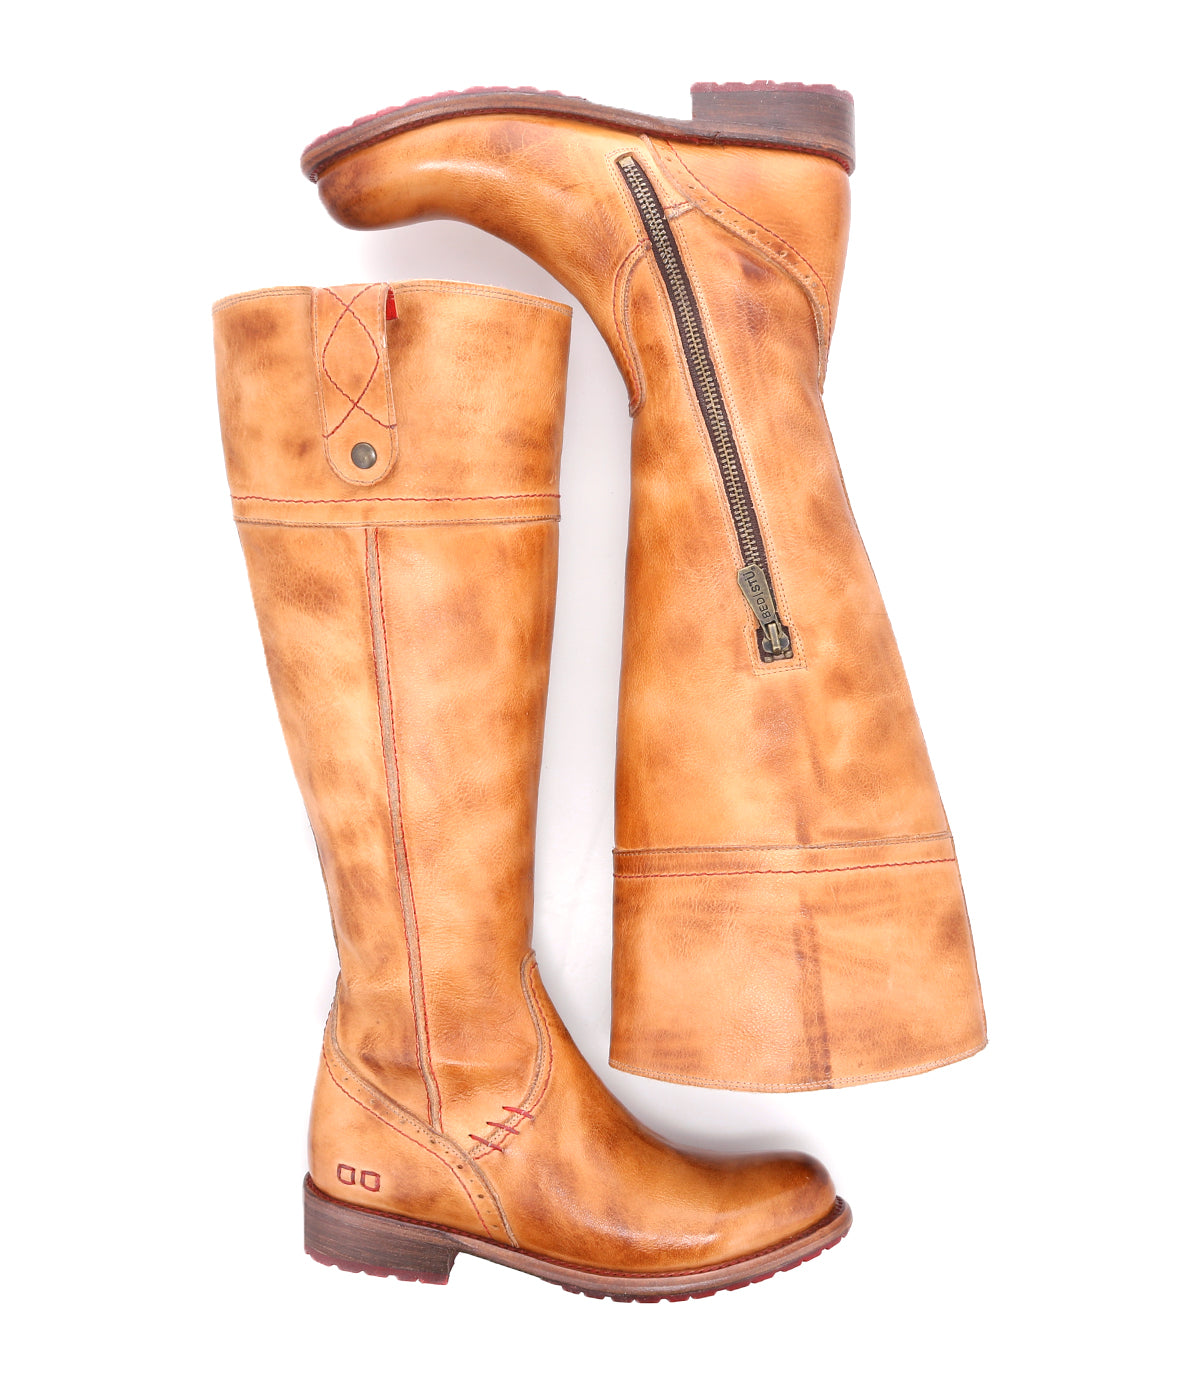 A pair of Bed Stu Jacqueline Wide Calf tall tan leather boots with zippers on the side.